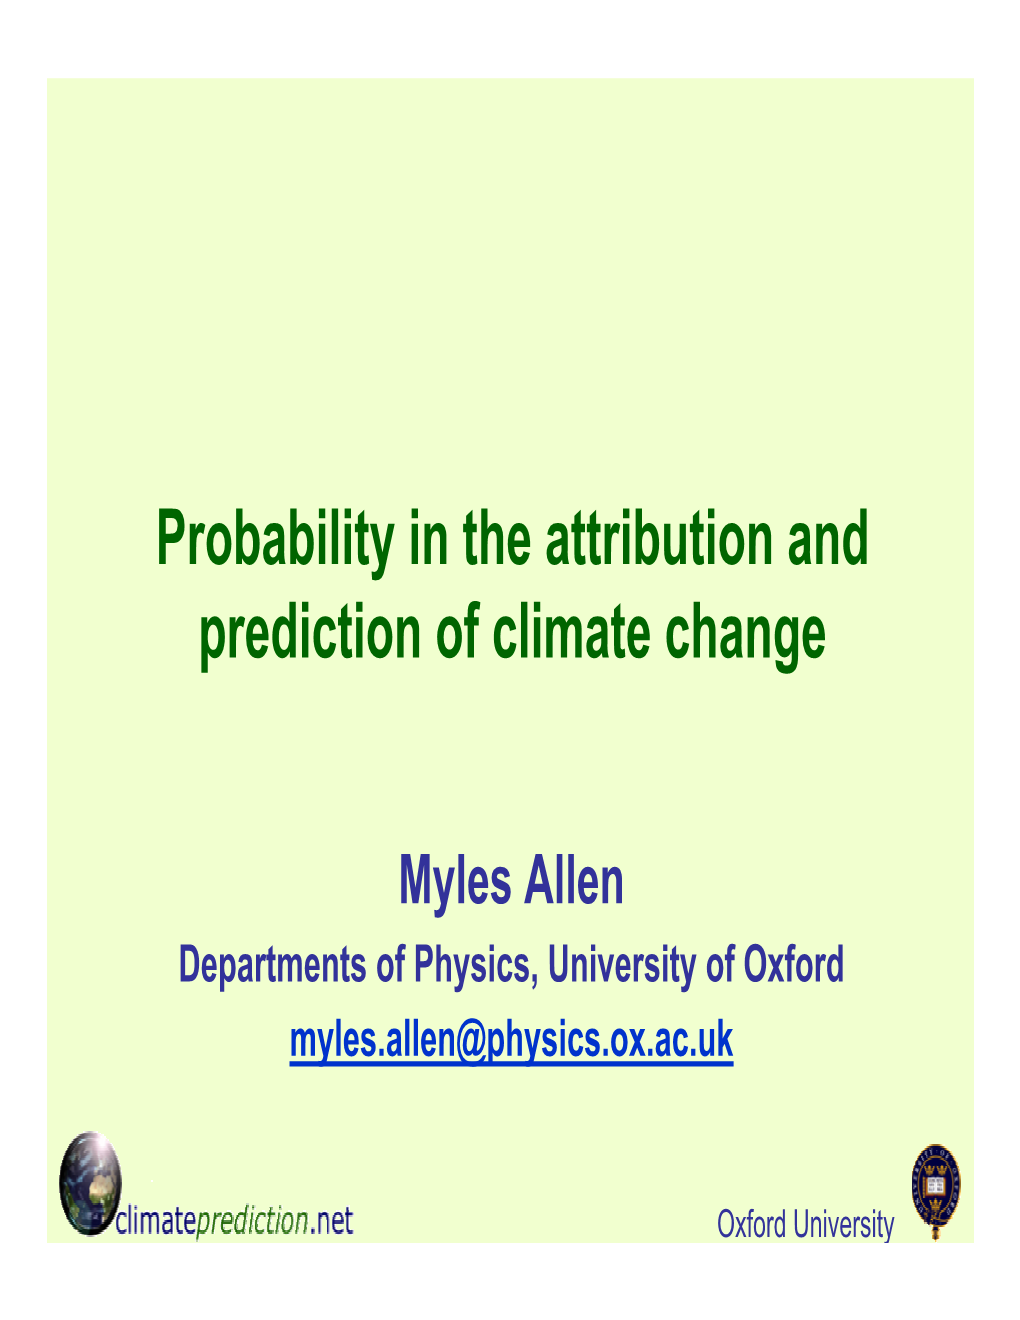 Probability in the Attribution and Prediction of Climate Change